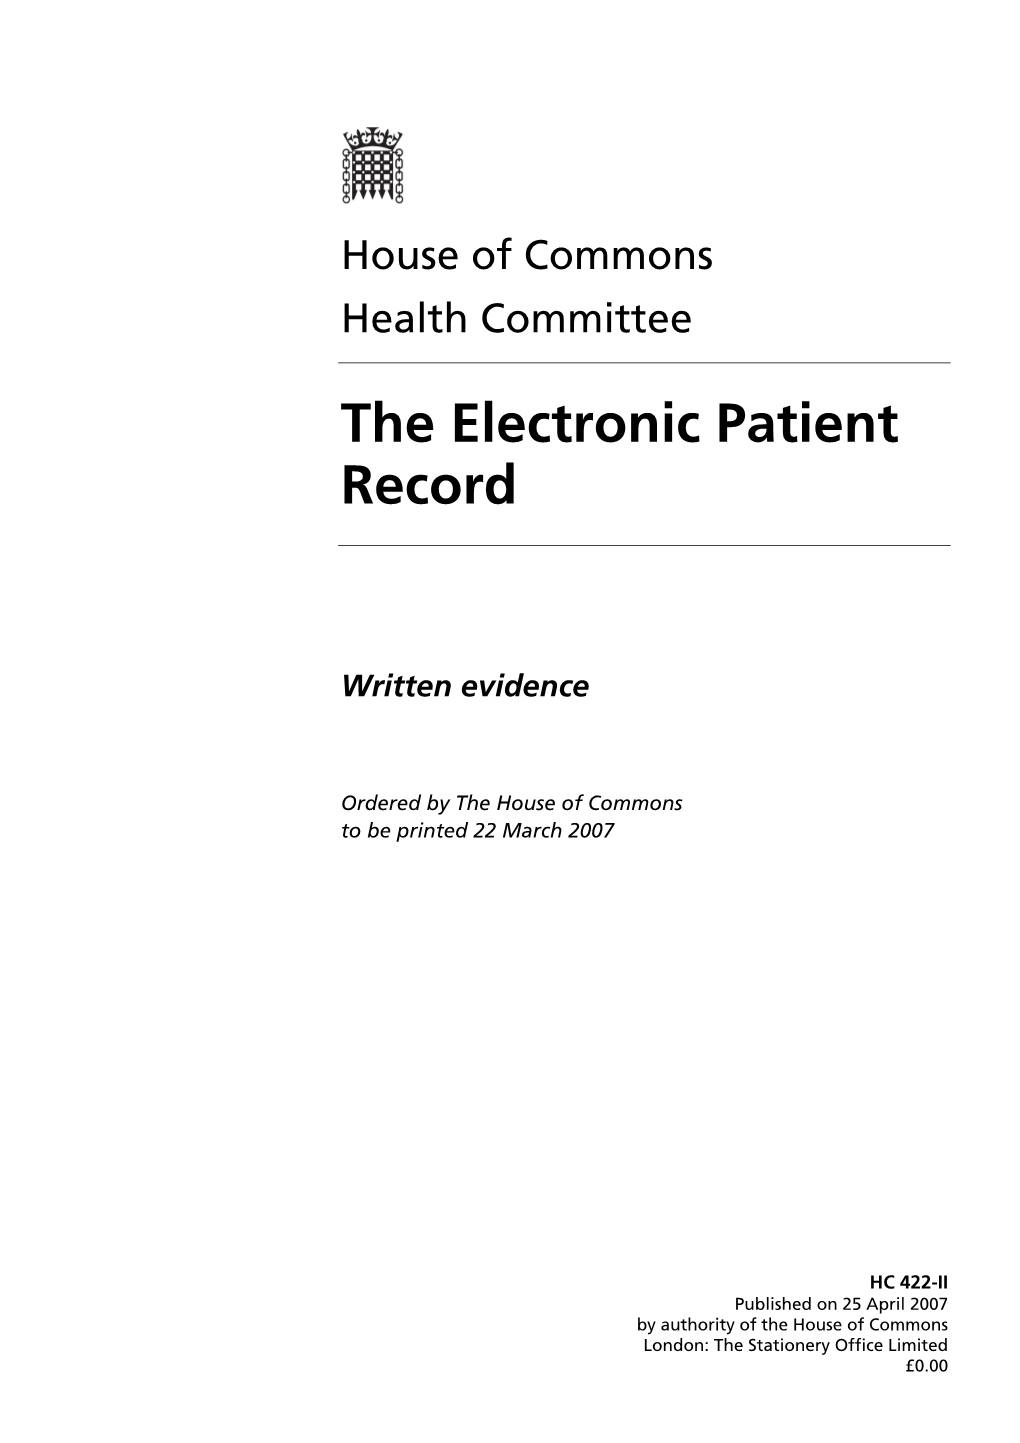 The Electronic Patient Record